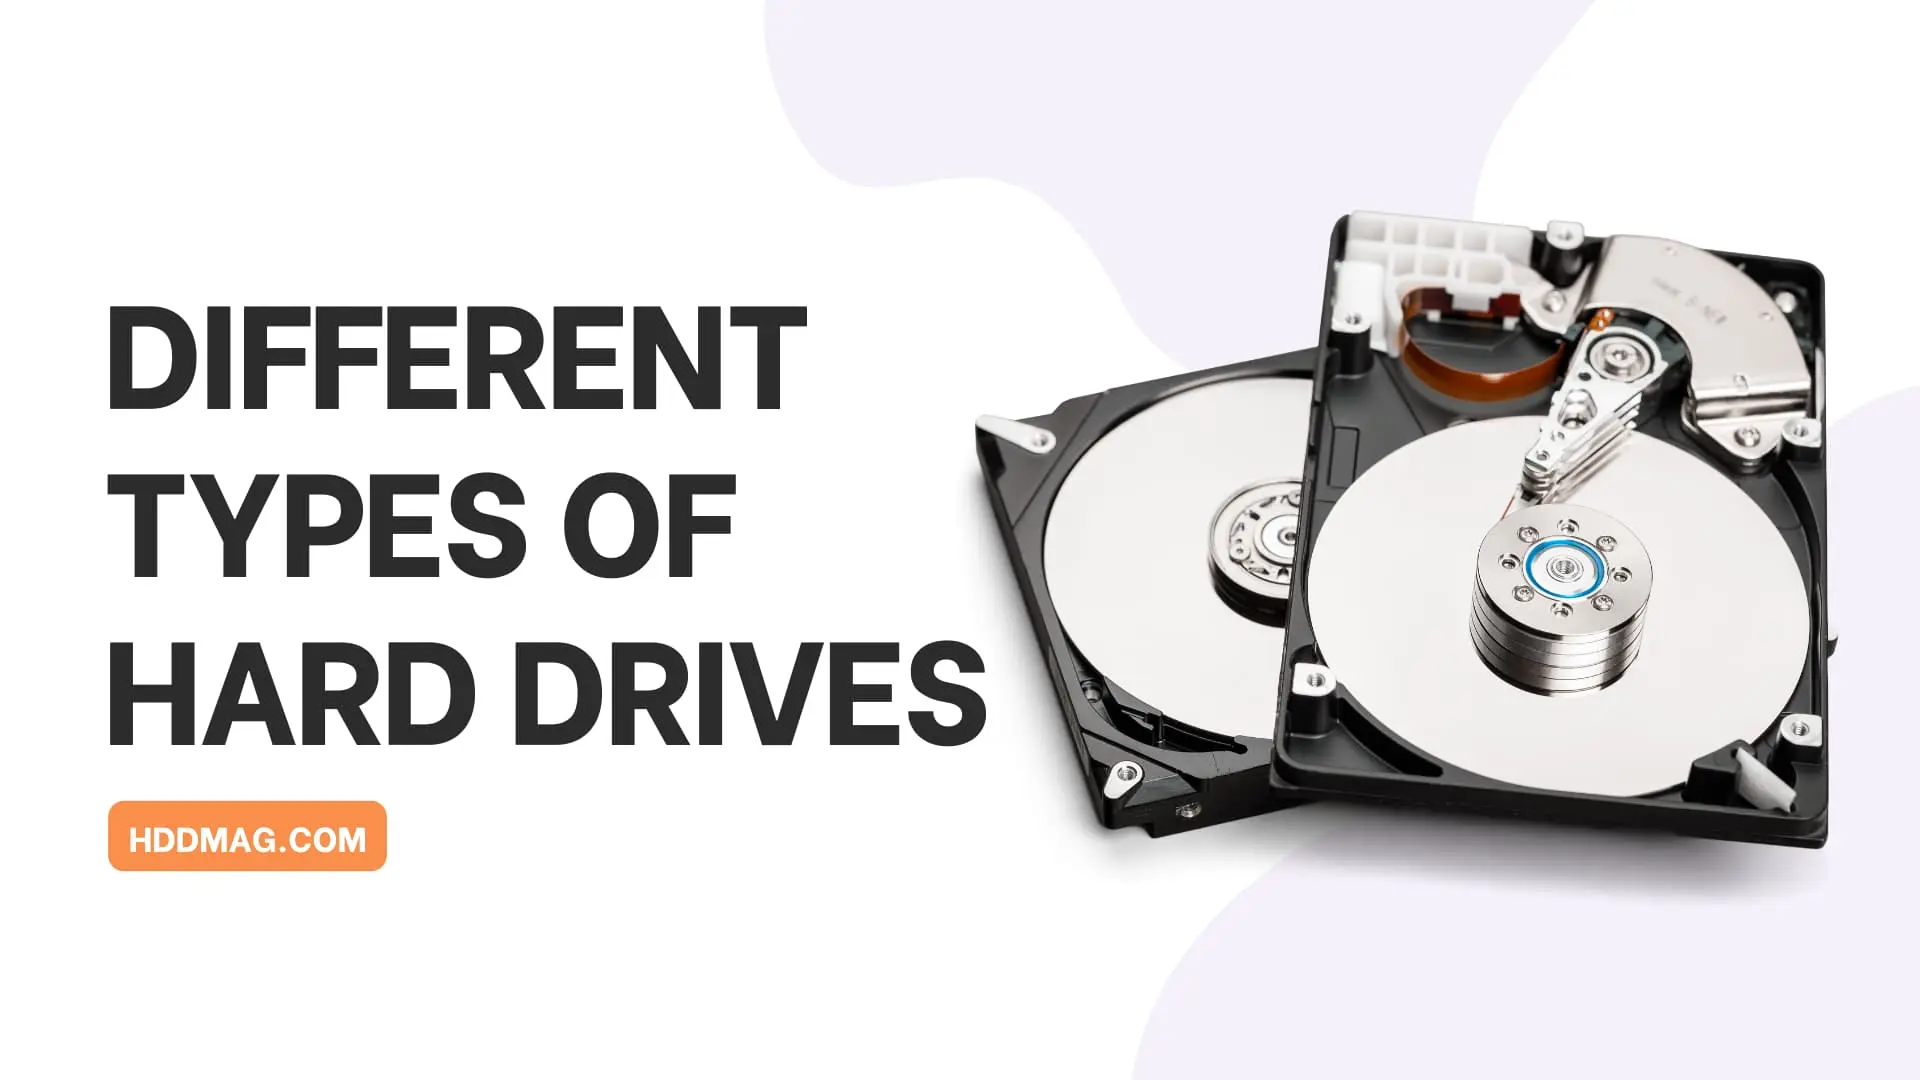 The Different Types of Hard Drives